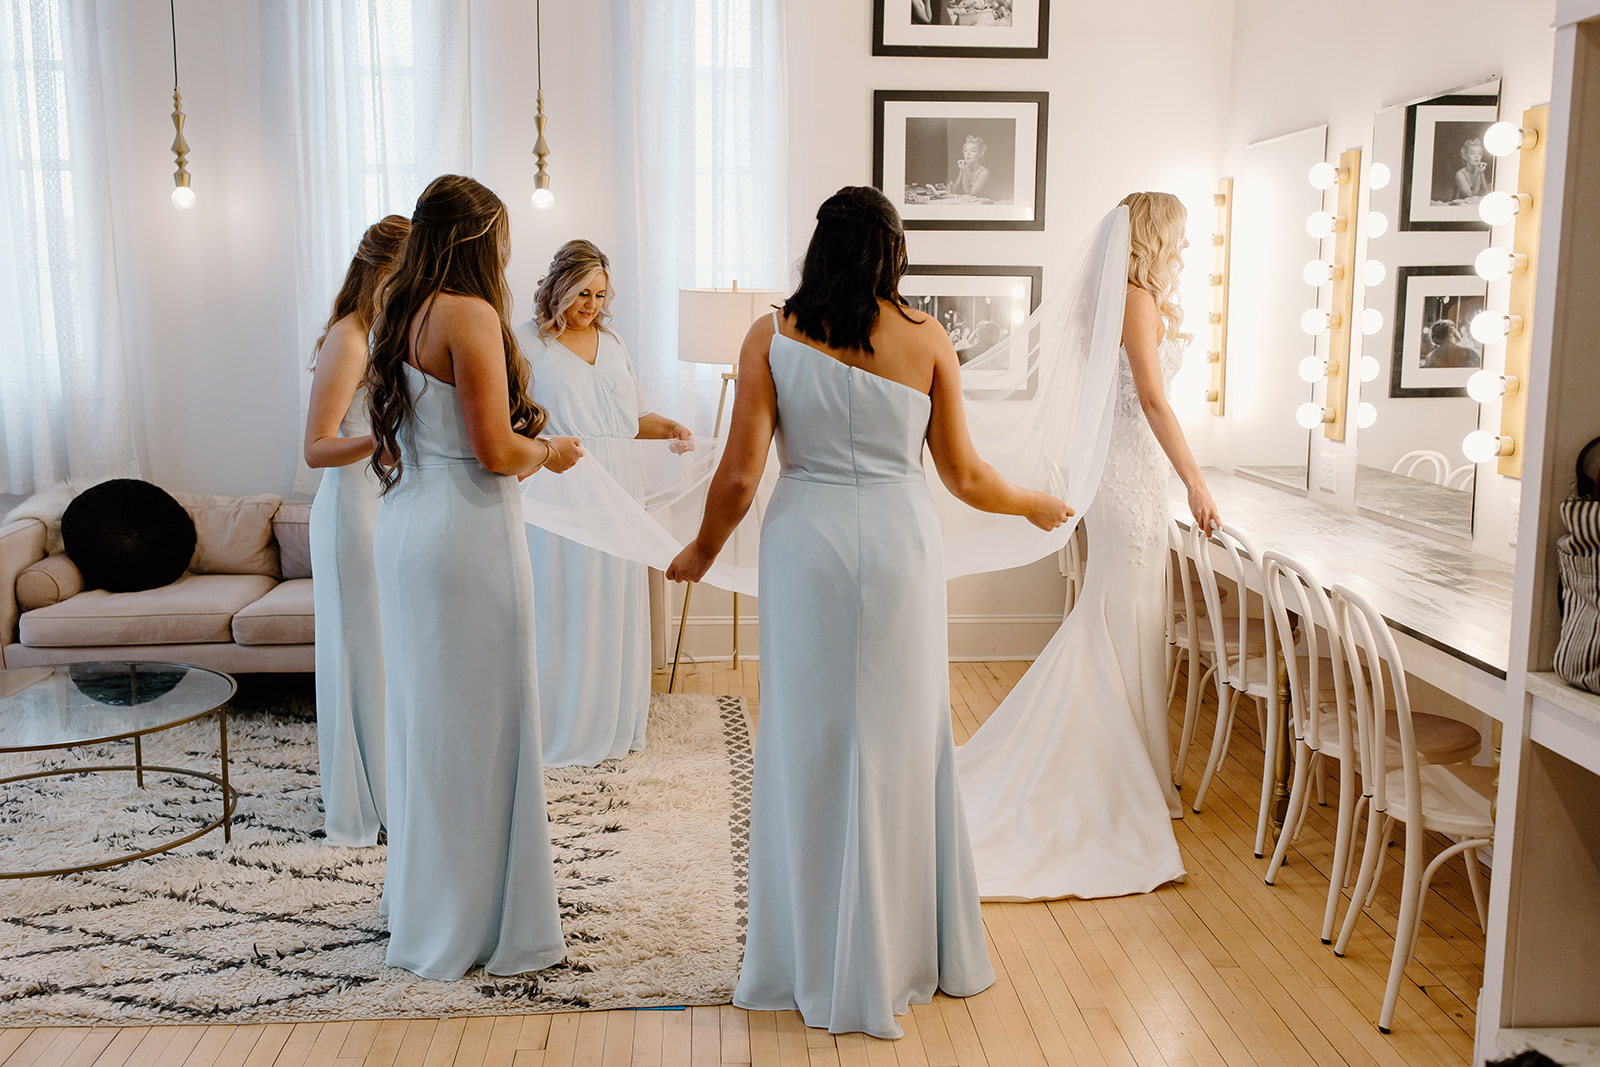 Bride looks in a mirror while all of her bridesmaids surround her and hold her veil.